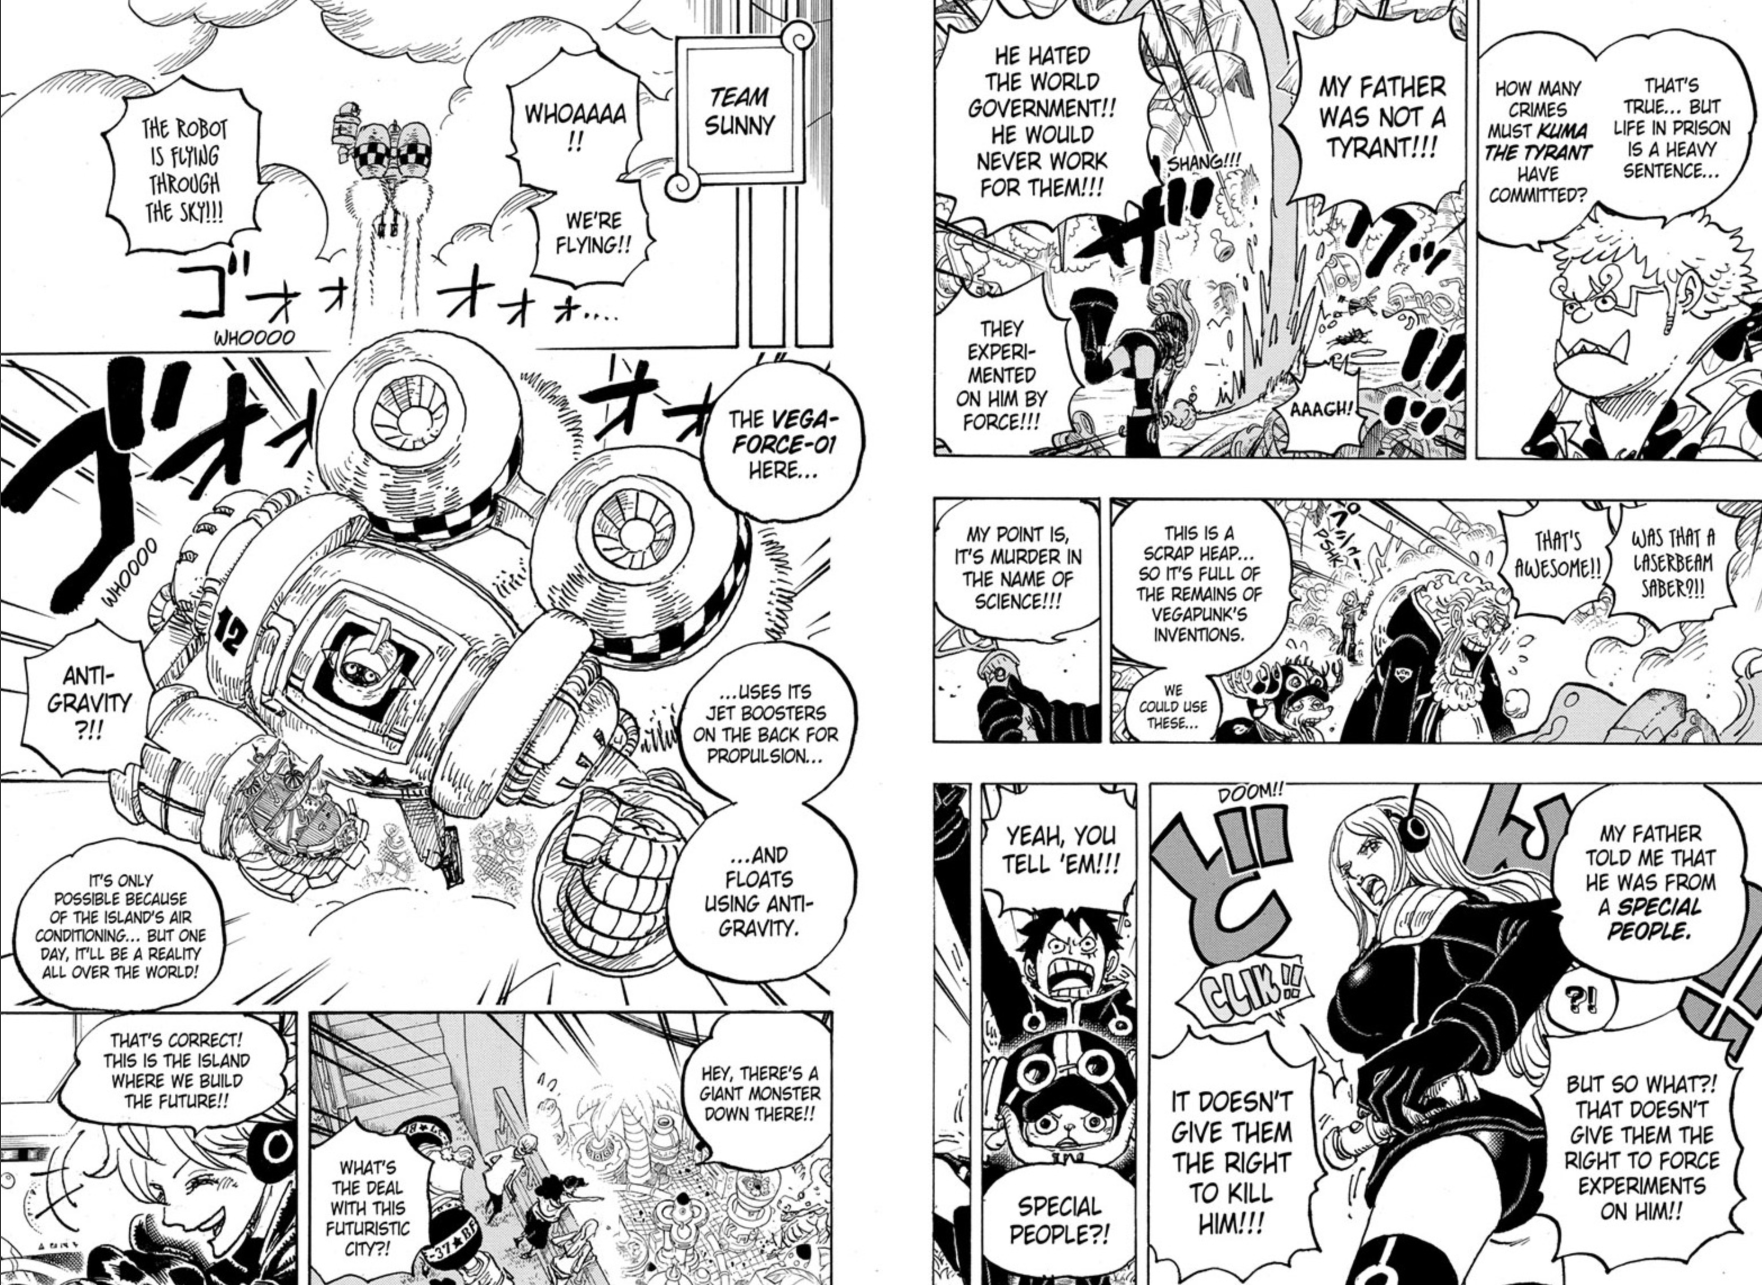 One Piece Chapter 1064 gives new costumes to the Straw Hat Pirates